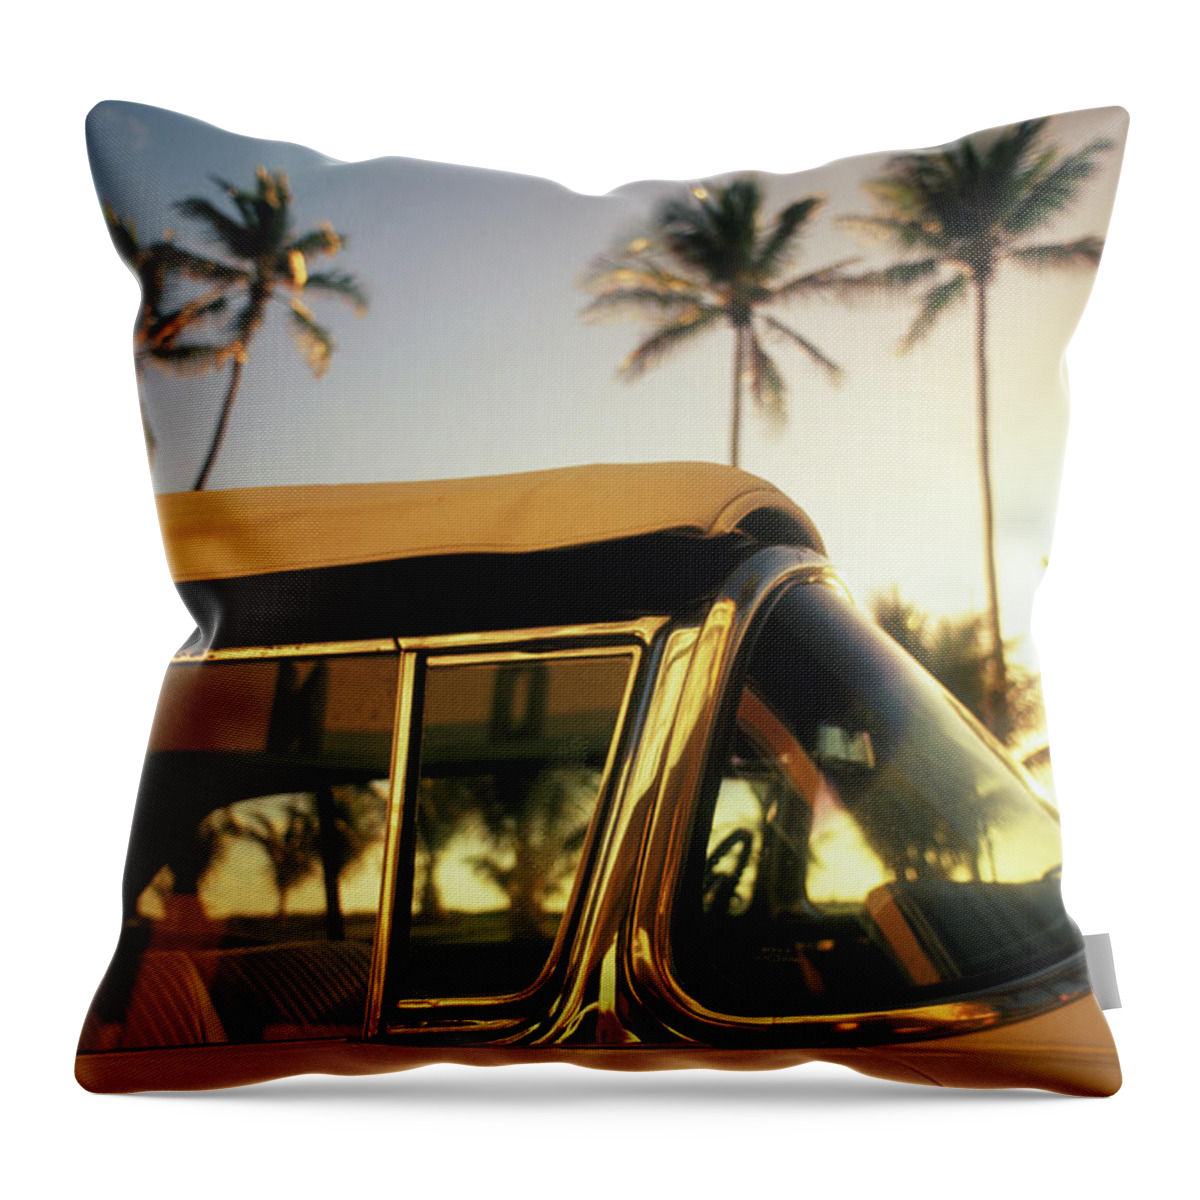 Outdoors Throw Pillow featuring the photograph Car Parked At South Beach by Lonely Planet